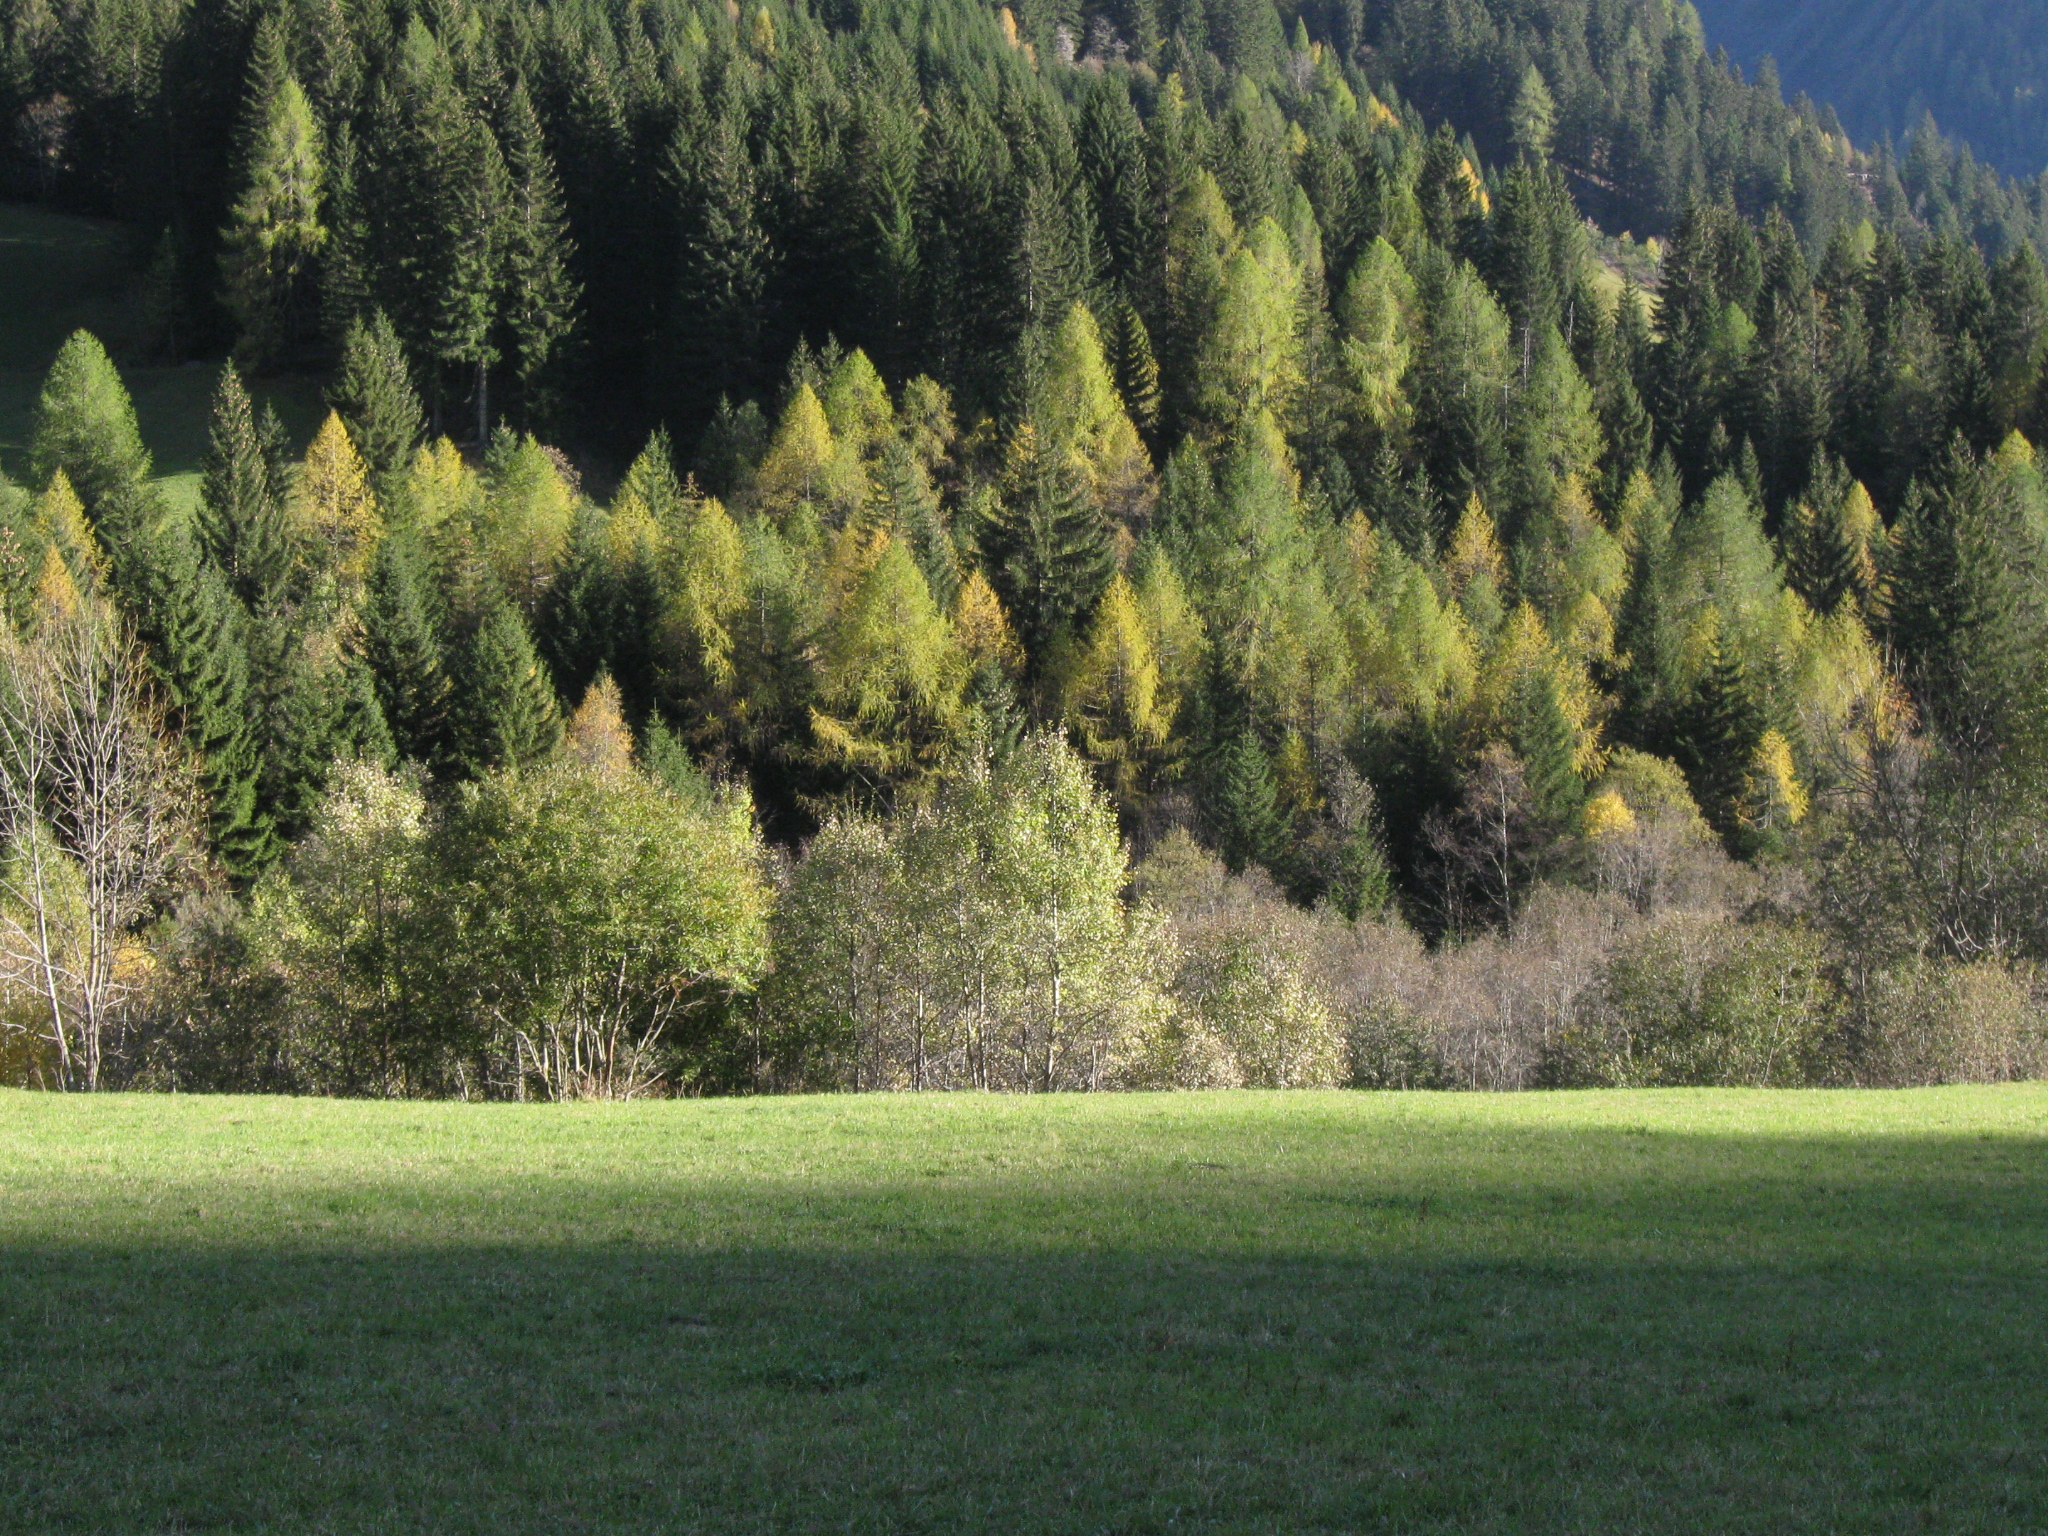 an unripe field with a forest in the background